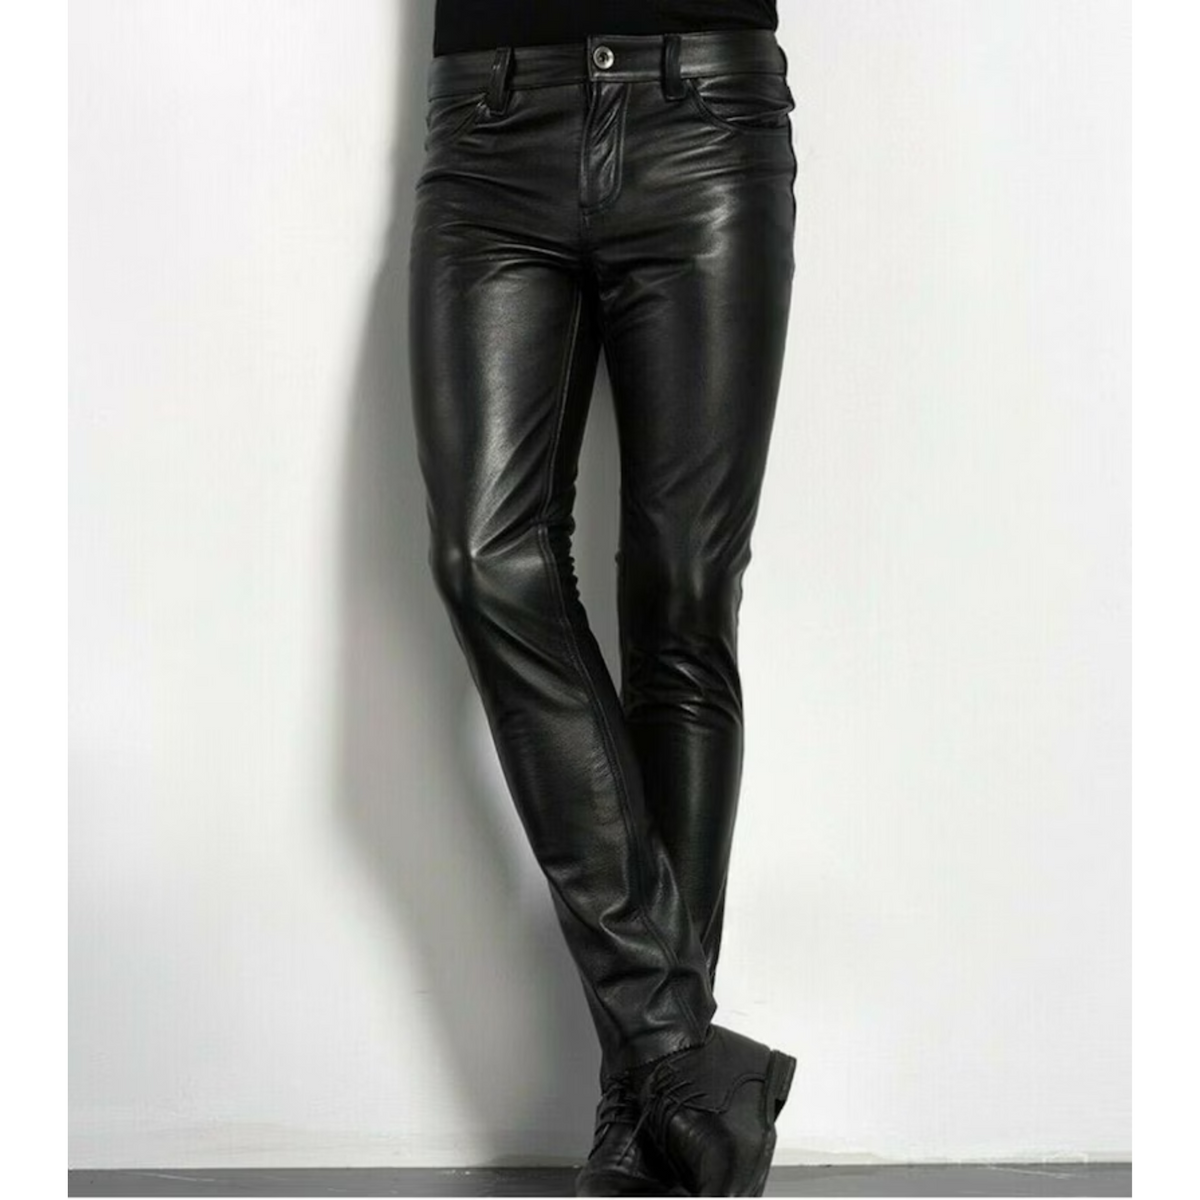 Men's Genuine Sheep Leather Party Pants Slim Fit Leather Pants